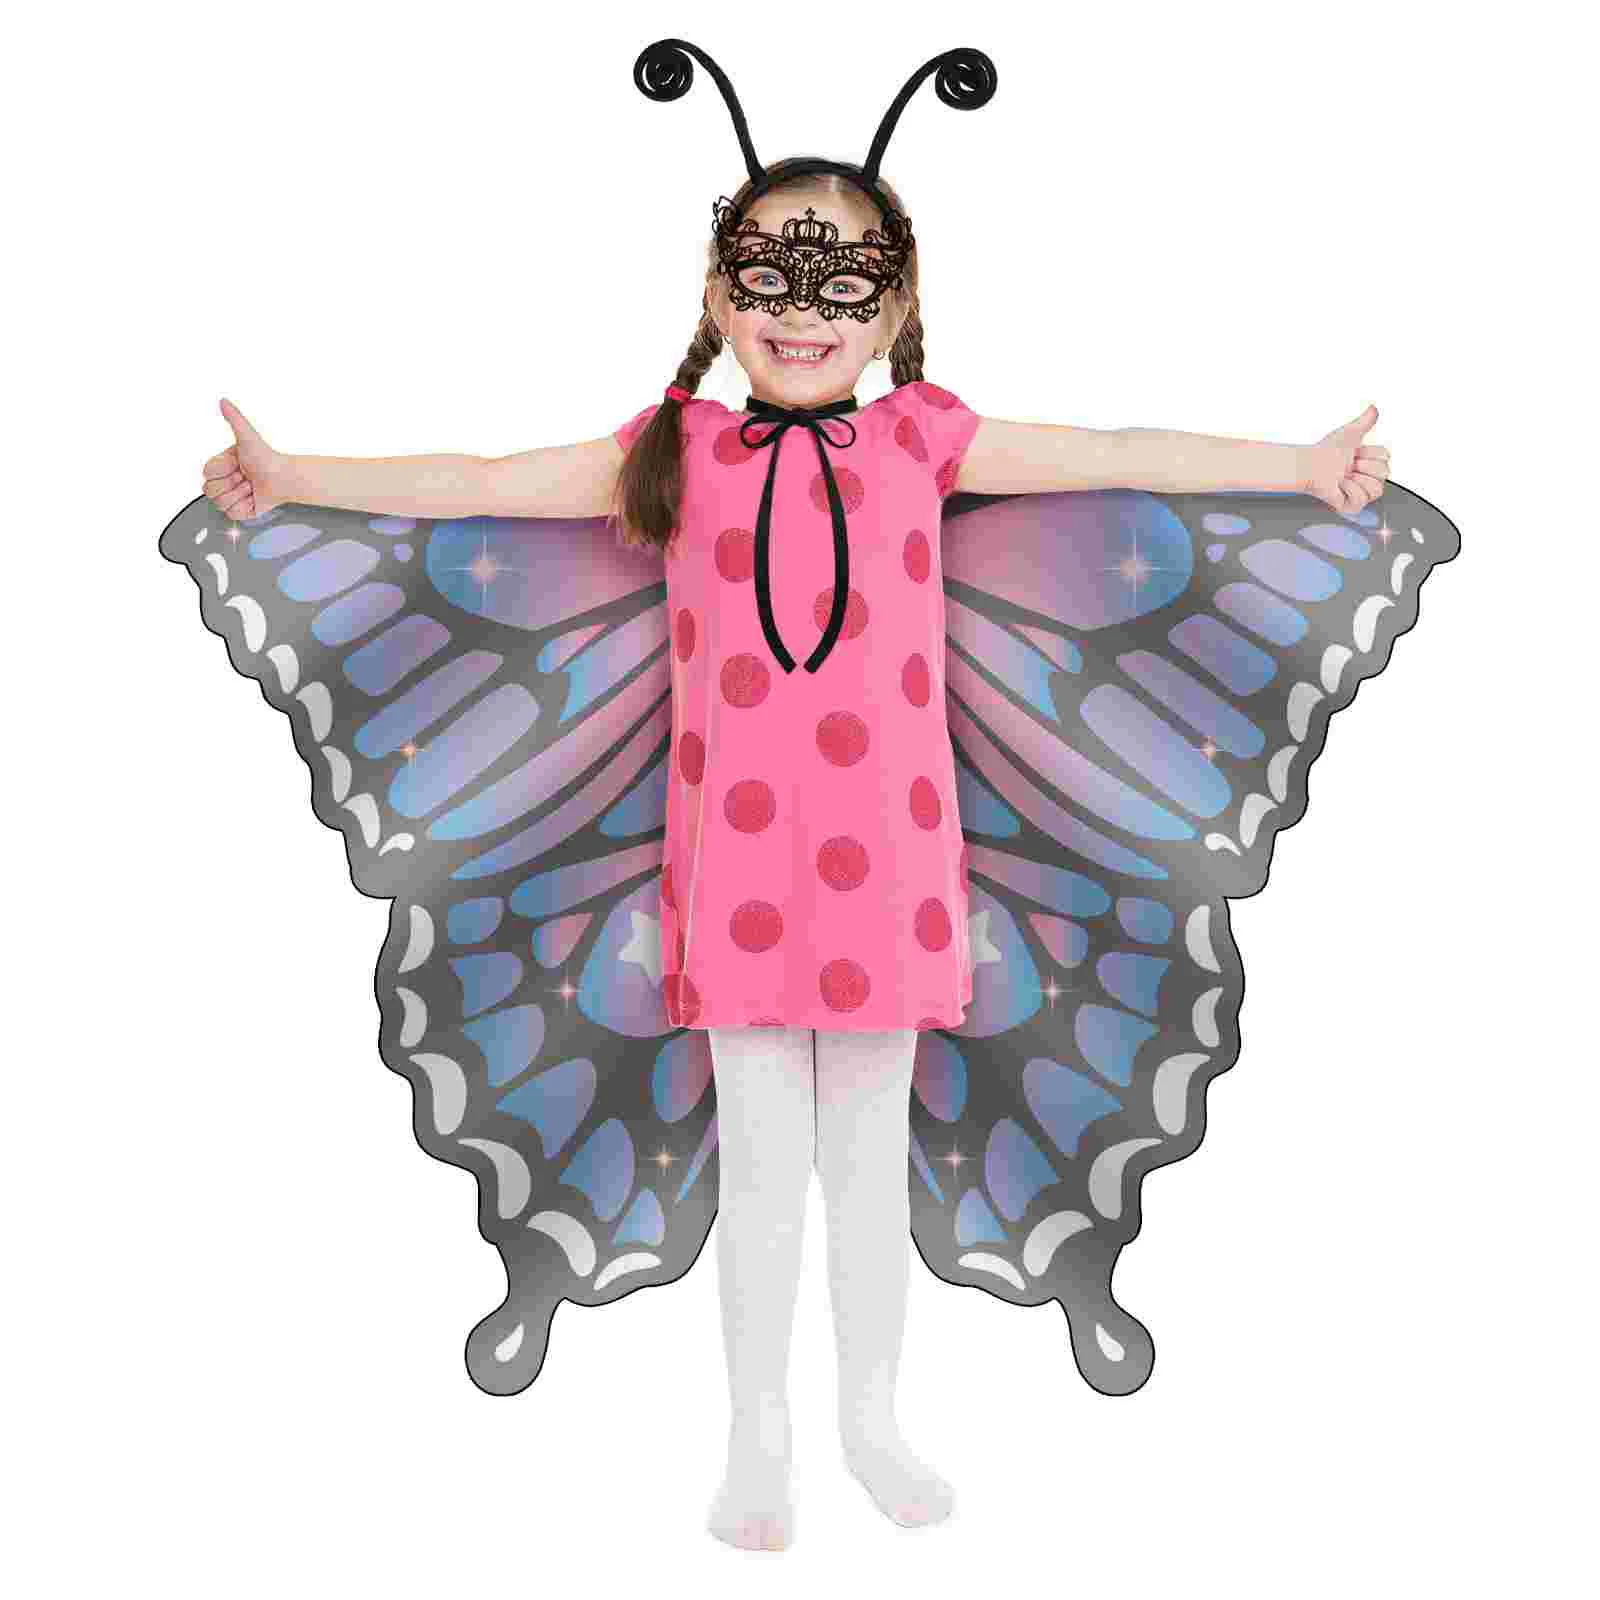 Butterflies Shawl Capes Kids Butterflies Wing Shawl Fairy Shawl Halloween Costume Masquerade Party Lace Makeup Headband